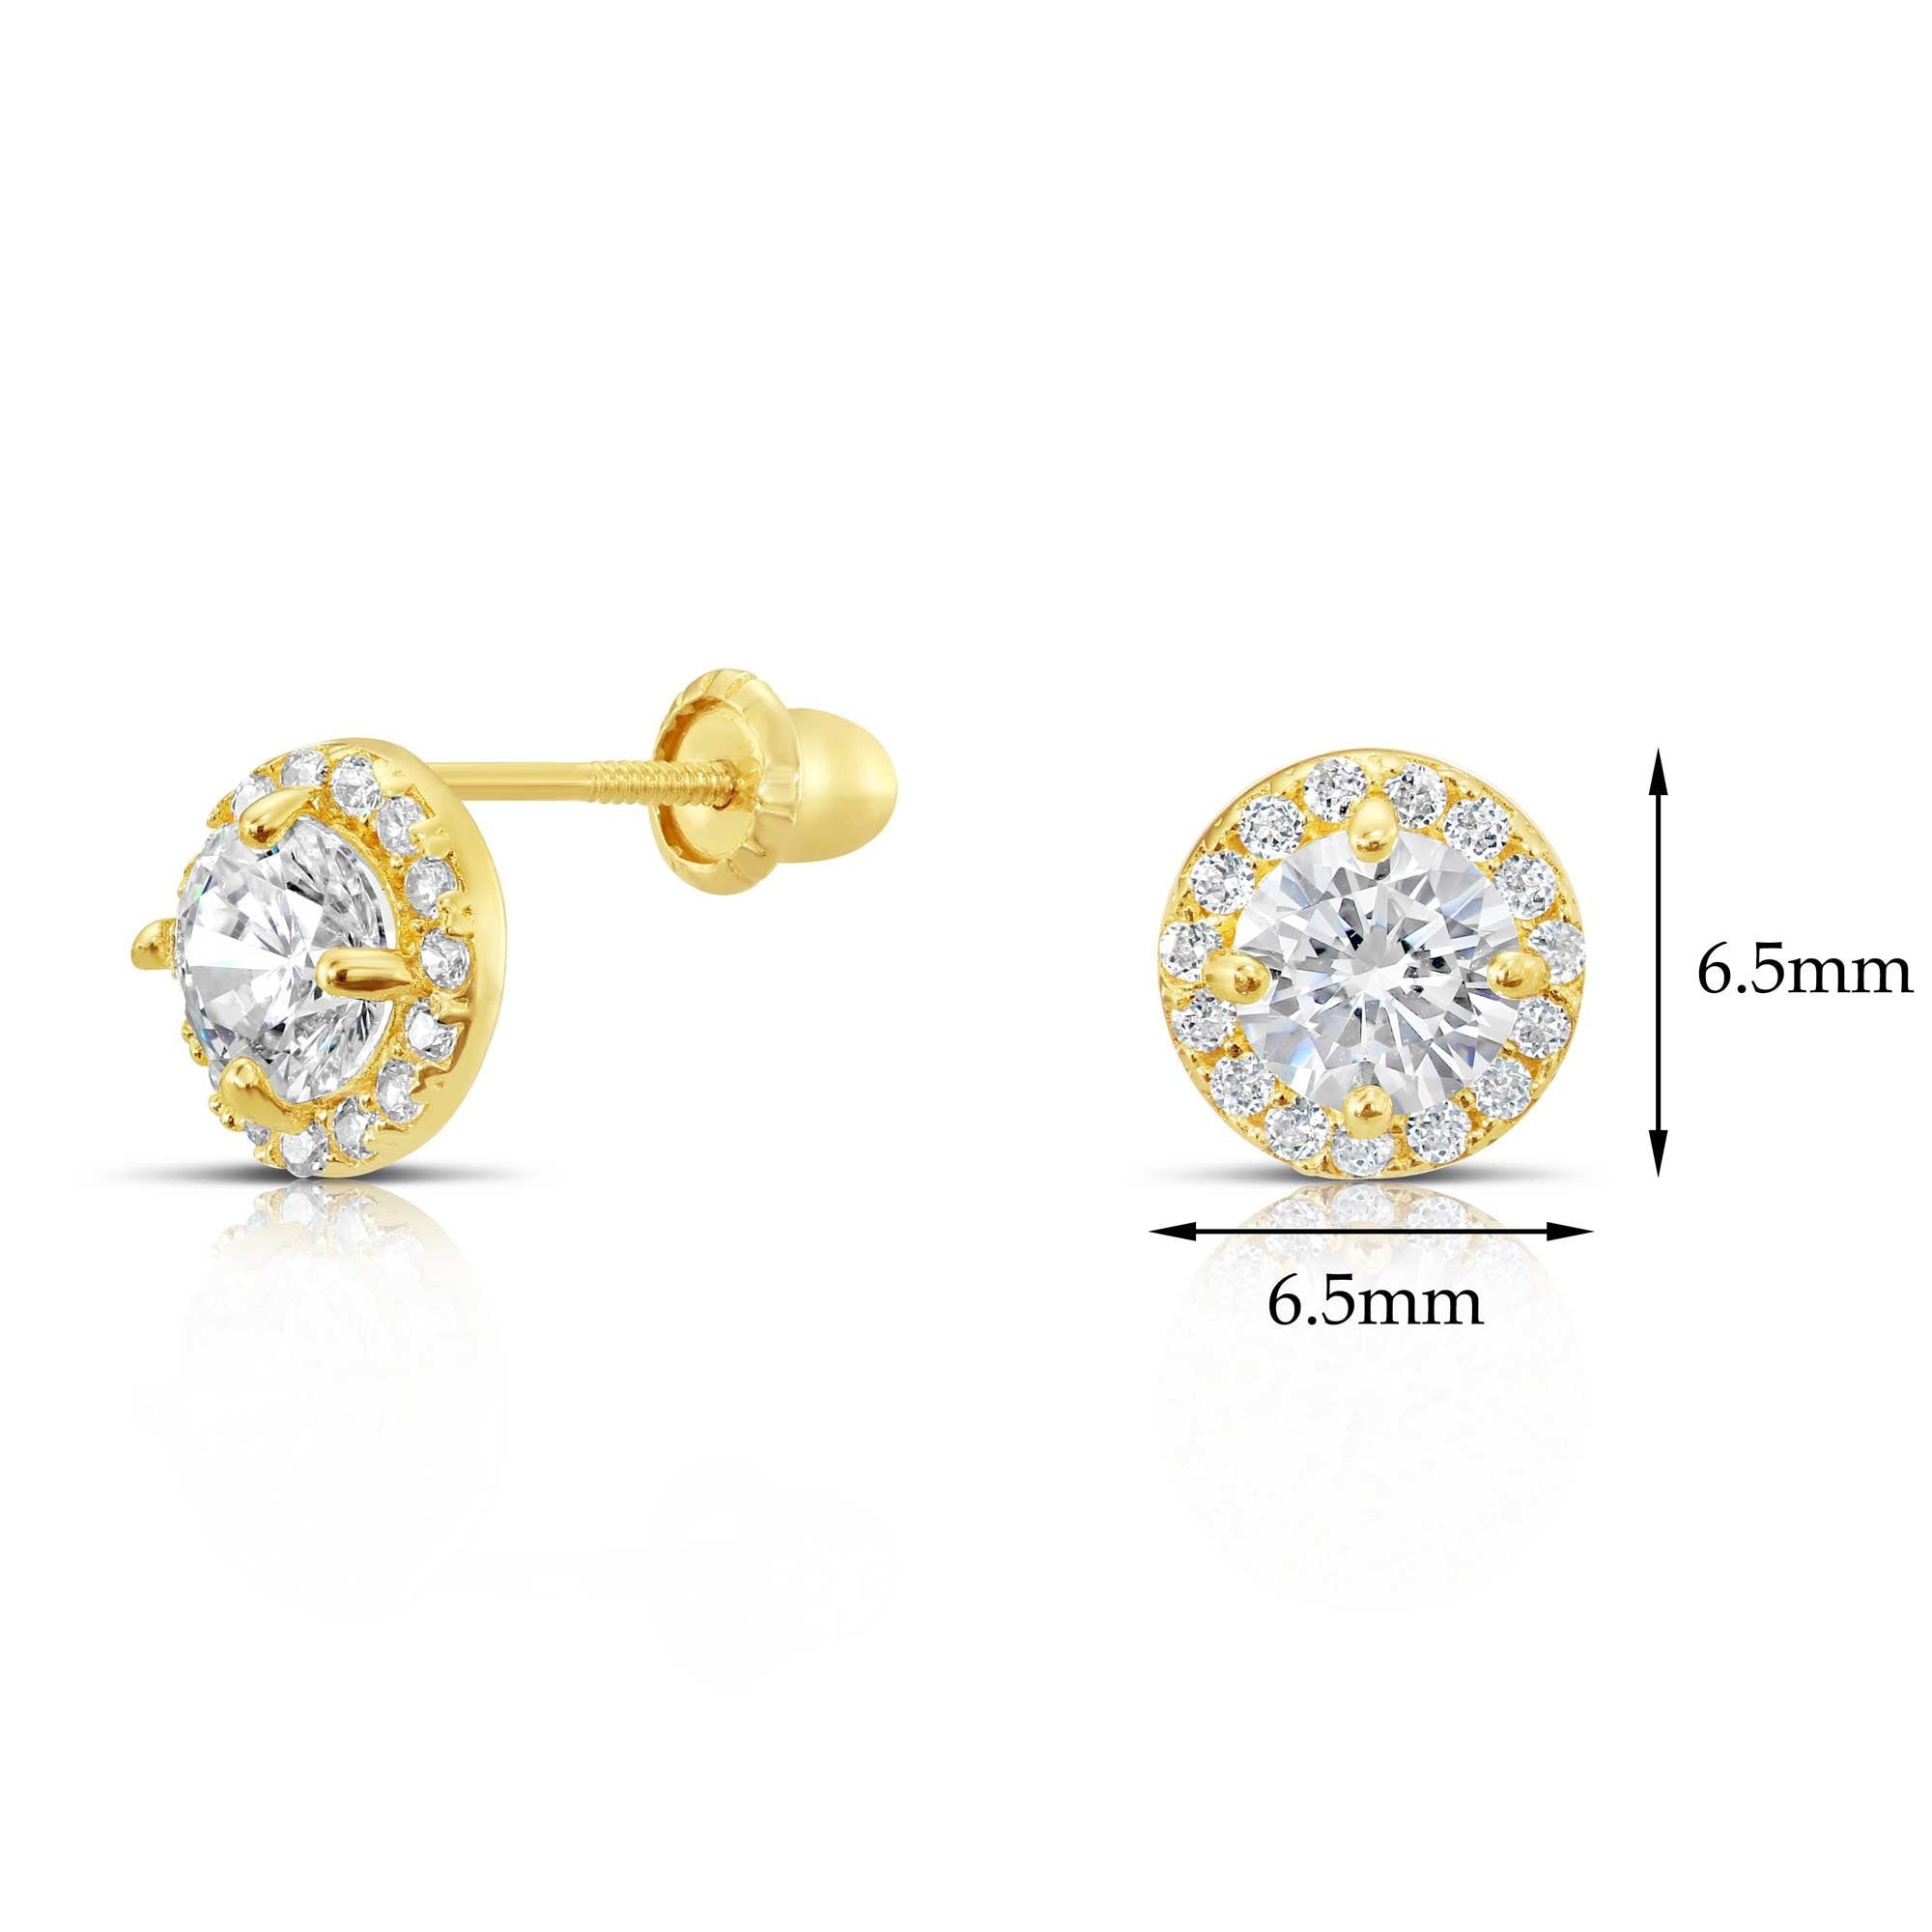 10k Yellow Gold Round Halo Stud Earrings